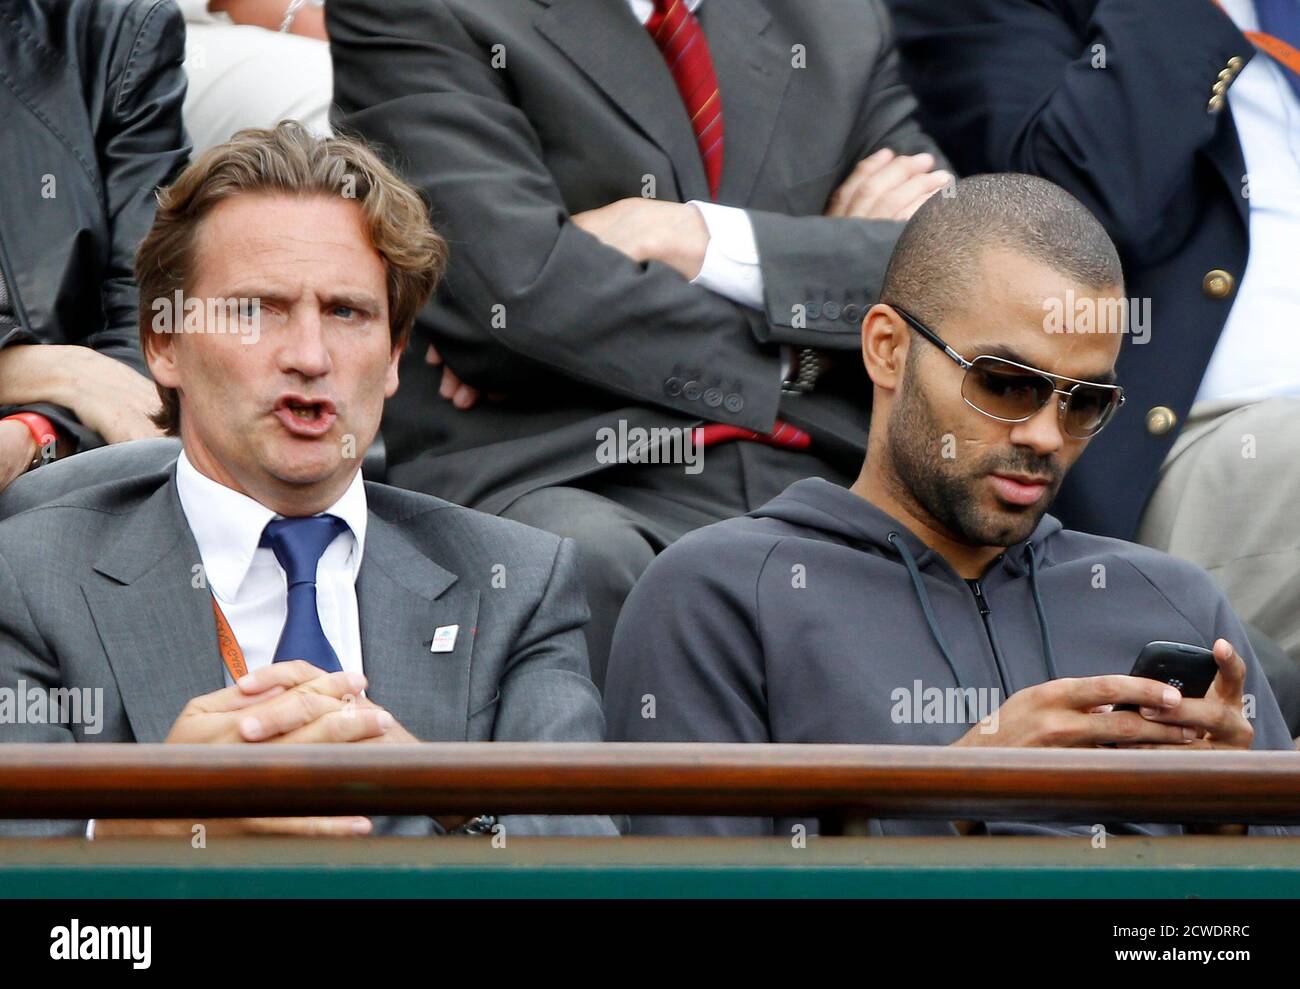 Basketball player Tony Parker (R) and Annecy 2018 Winter Olympic bid  President Charles Beigbeder attend the match between Jo-Wilfried Tsonga of  France and Stanislas Wawrinka of Switzerland during the French Open tennis